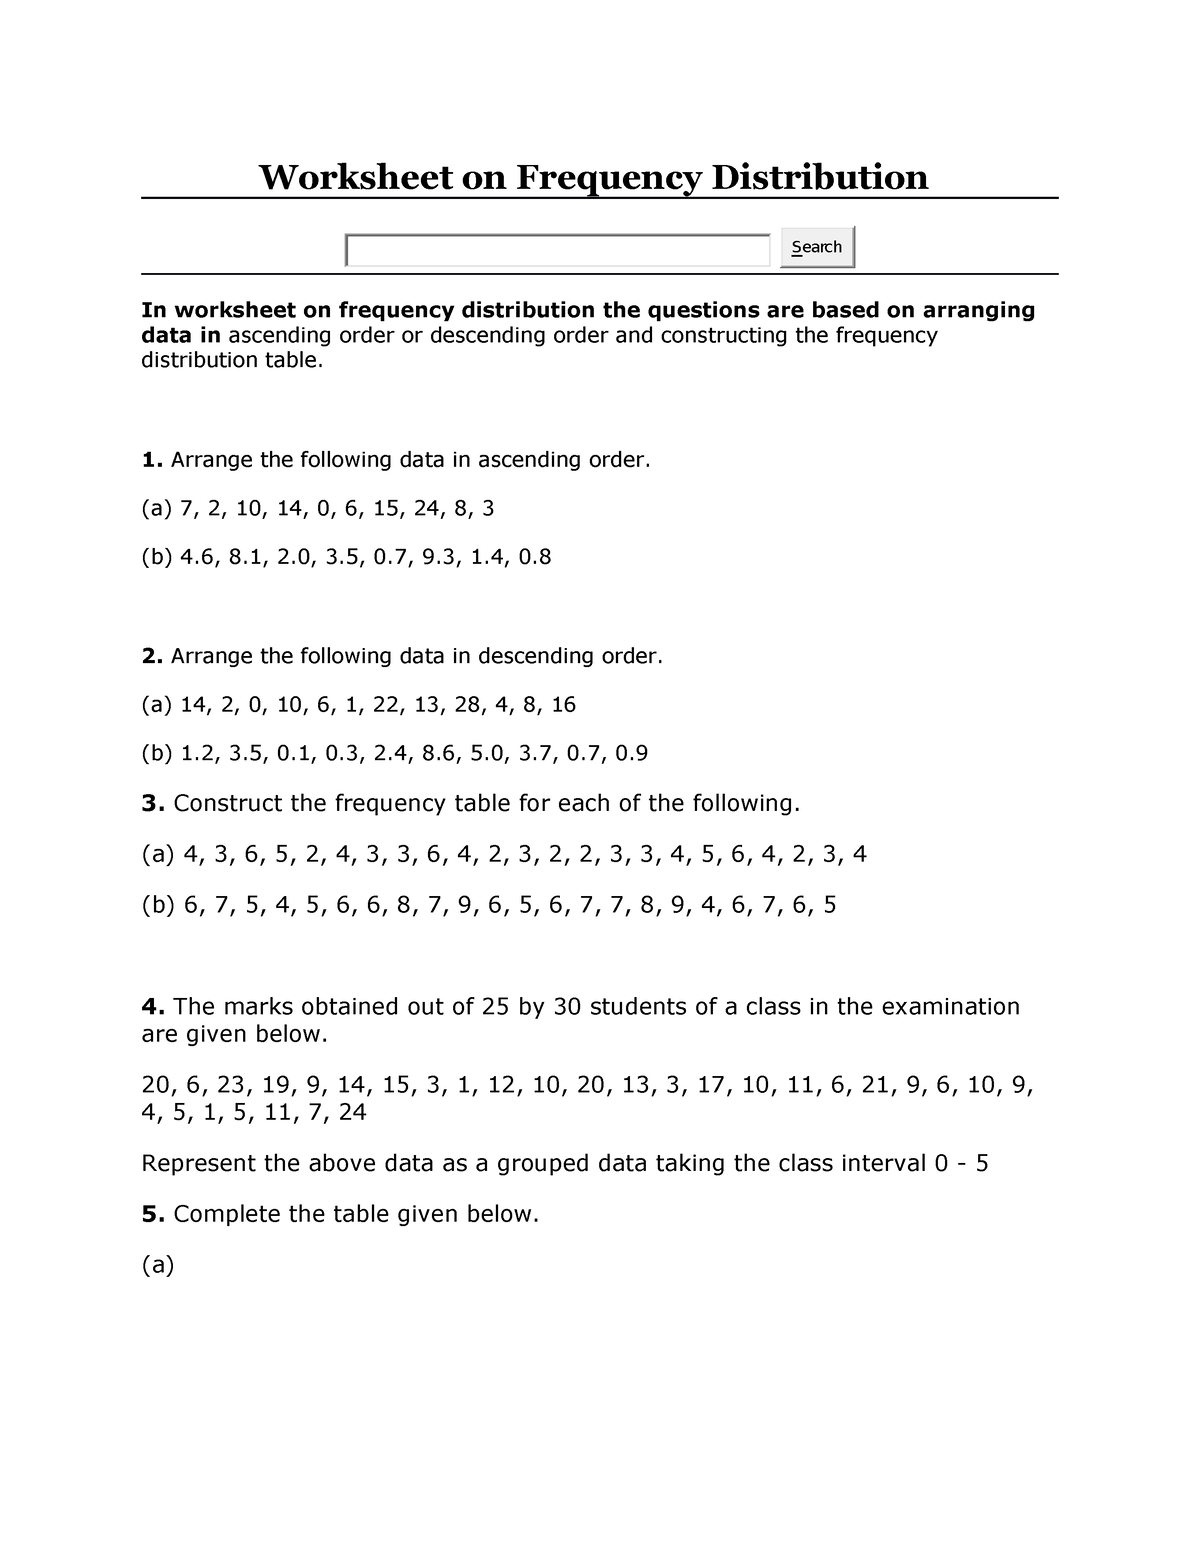 412171814-frequency-distribution-worksheet-on-frequency-distribution-in-worksheet-on-frequency